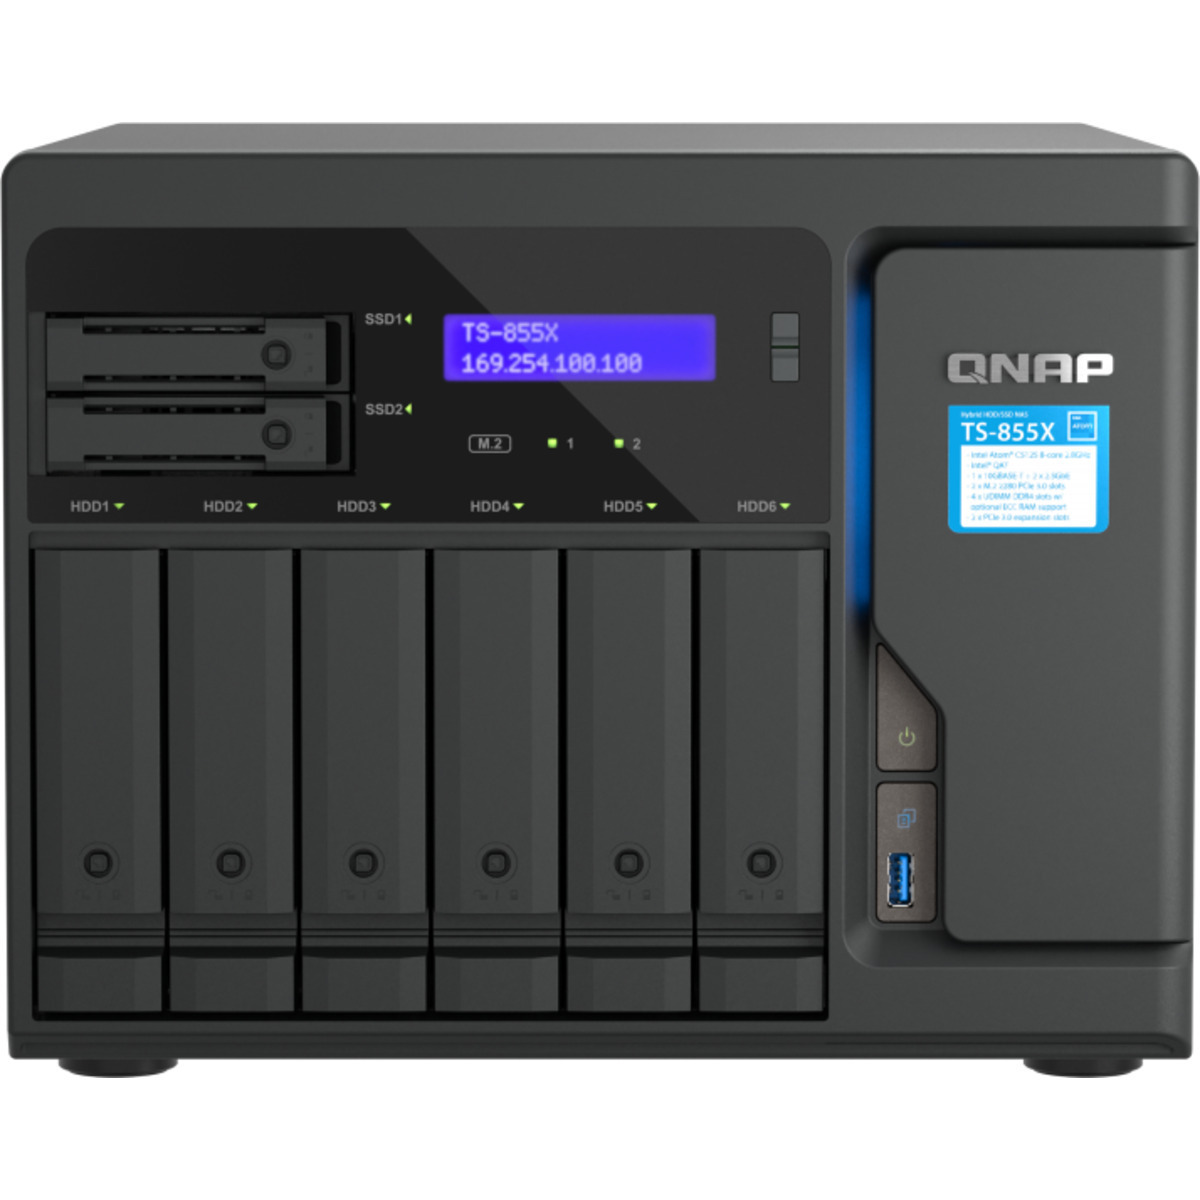 QNAP TS-855X 6tb 6+2-Bay Desktop Multimedia / Power User / Business NAS - Network Attached Storage Device 3x2tb Samsung 870 EVO MZ-77E2T0BAM 2.5 560/530MB/s SATA 6Gb/s SSD CONSUMER Class Drives Installed - Burn-In Tested - FREE RAM UPGRADE TS-855X